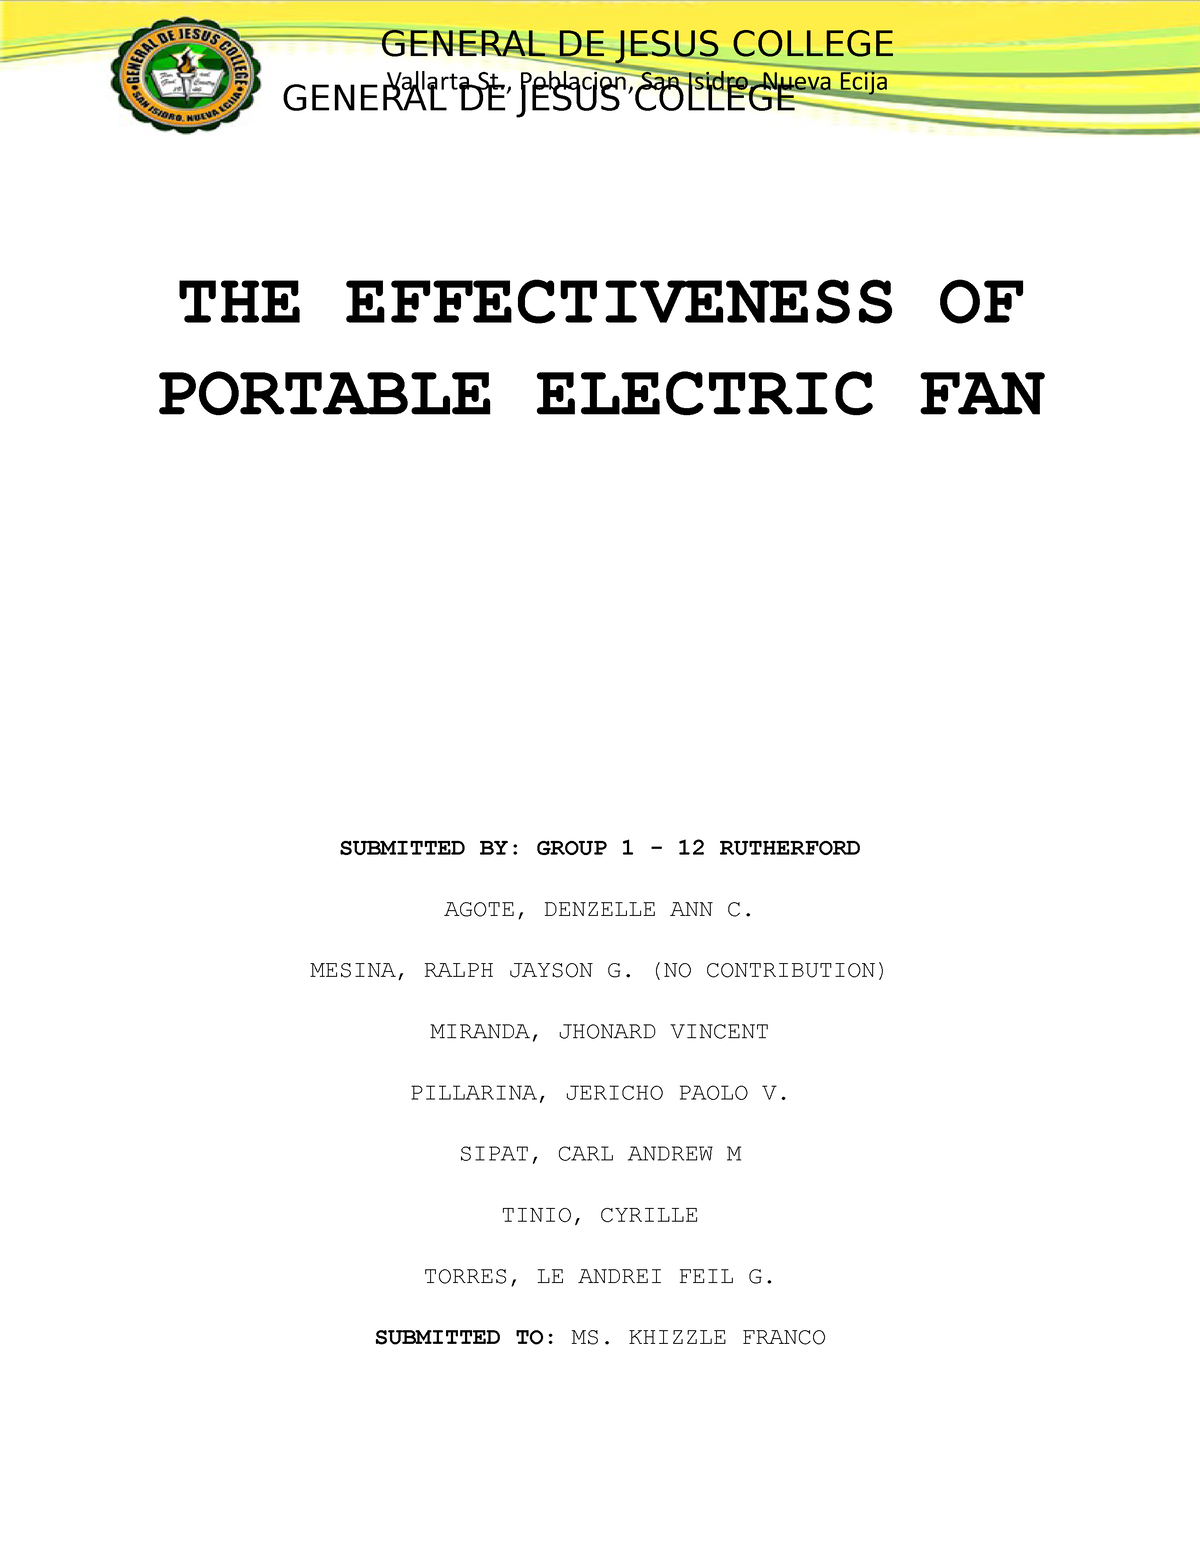 research paper about electric fan